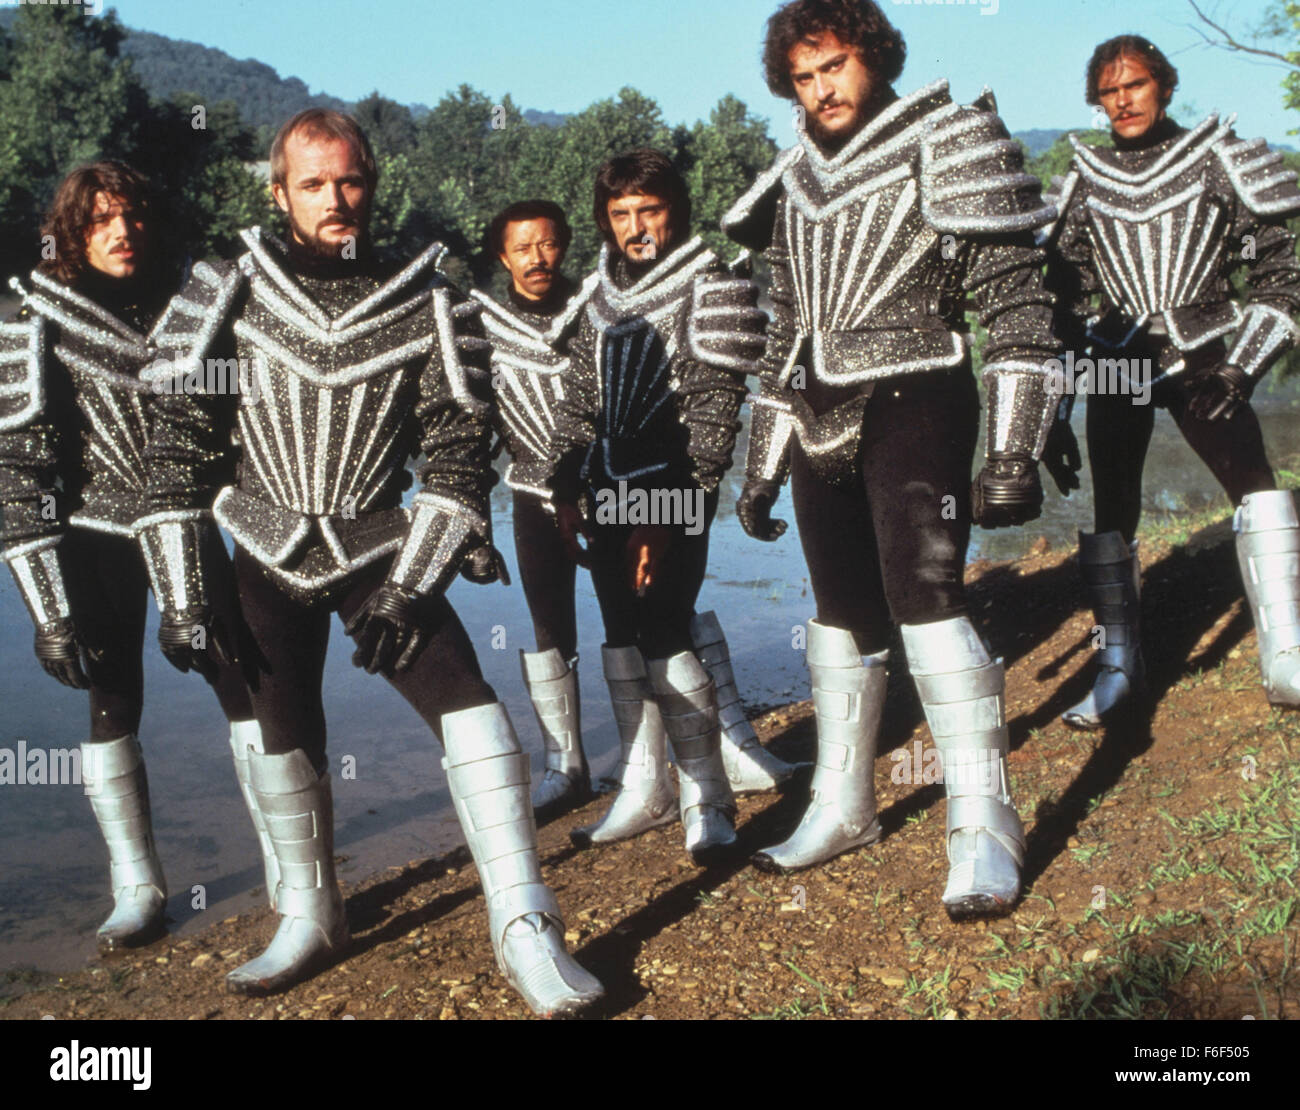 RELEASE DATE: April 10, 1981   MOVIE TITLE: Knightriders   STUDIO: United Film   DIRECTOR: George A. Romero  PLOT: A travelling troupe of jousters and performers are slowly cracking under the pressure of hick cops, financial troubles and their failure to live up to their own ideals. The group's leader, King Billy, is increasingly unable to maintain his warrior's rule while the Black Knight is being tempted away to LA and stardom, as they all have to ask why they were here in the first place   PICTURED: TOM SAVINI as Morgan  (Credit Image: c United Film/Entertainment Pictures) Stock Photo